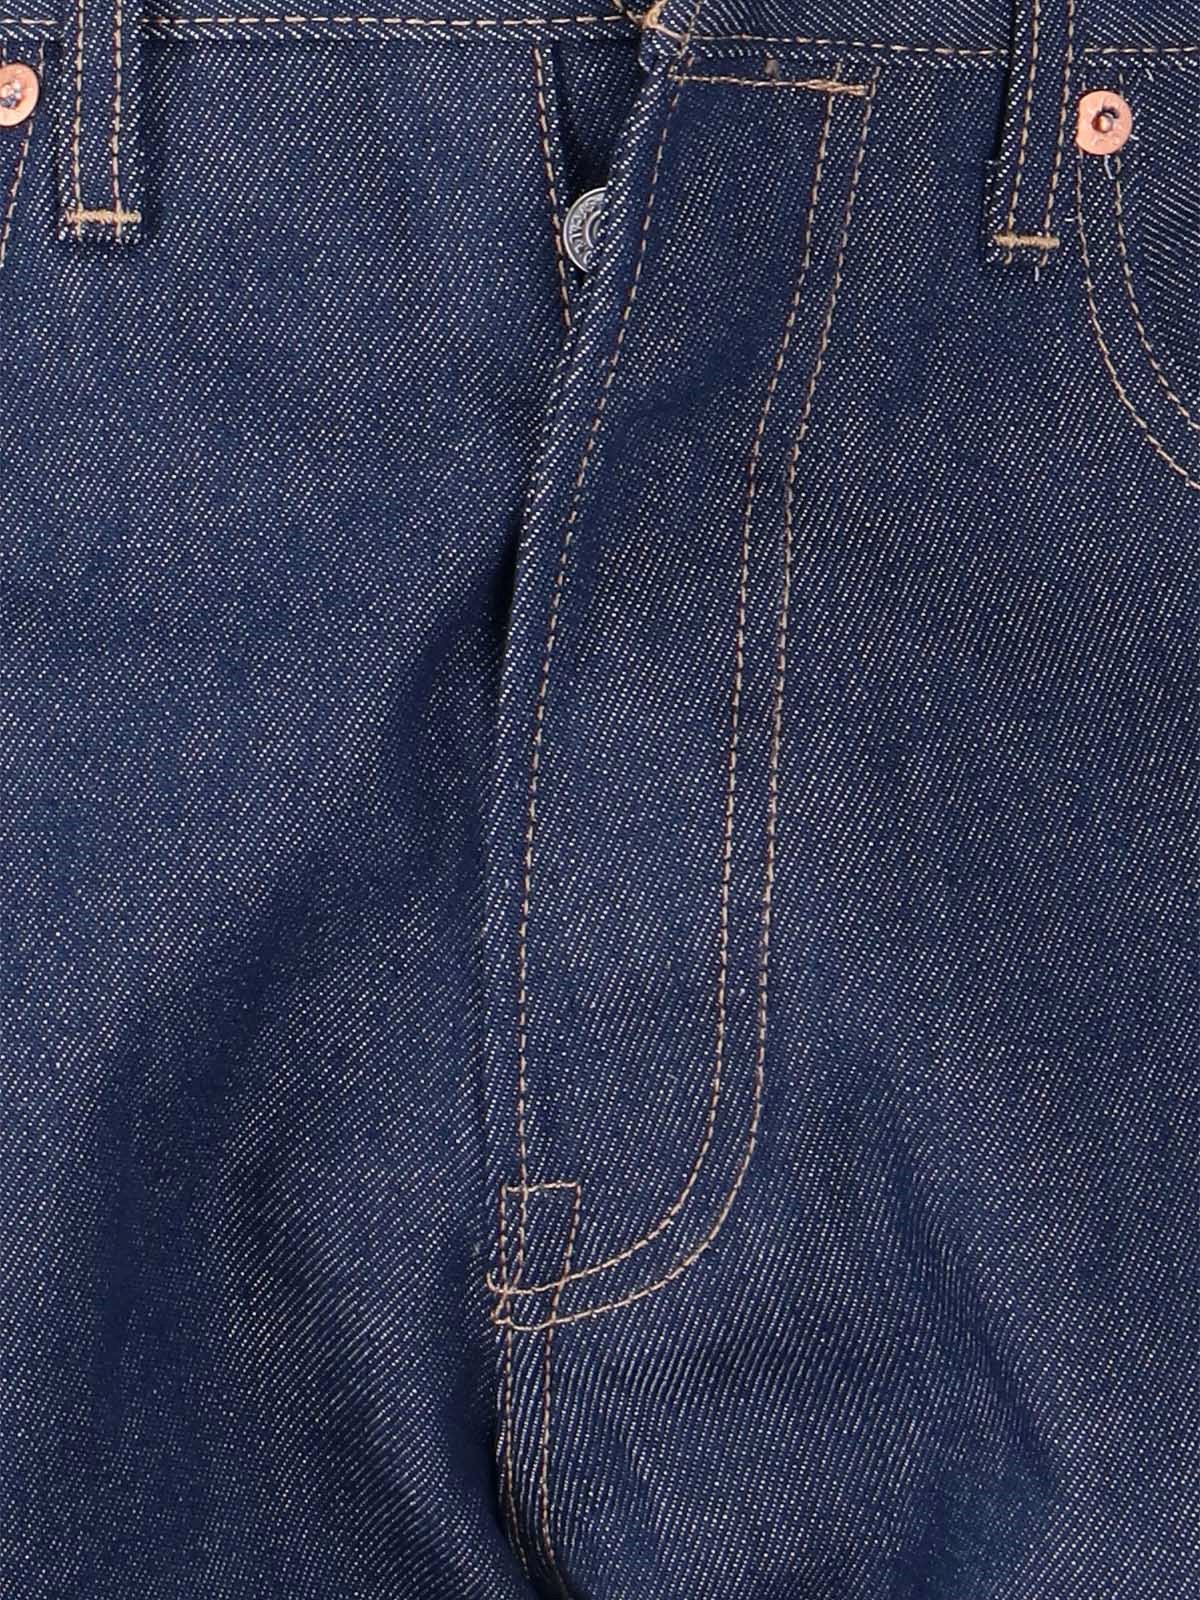 Levi's strauss 'made & crafted 80s 501' jeans available on SUGAR - 95496